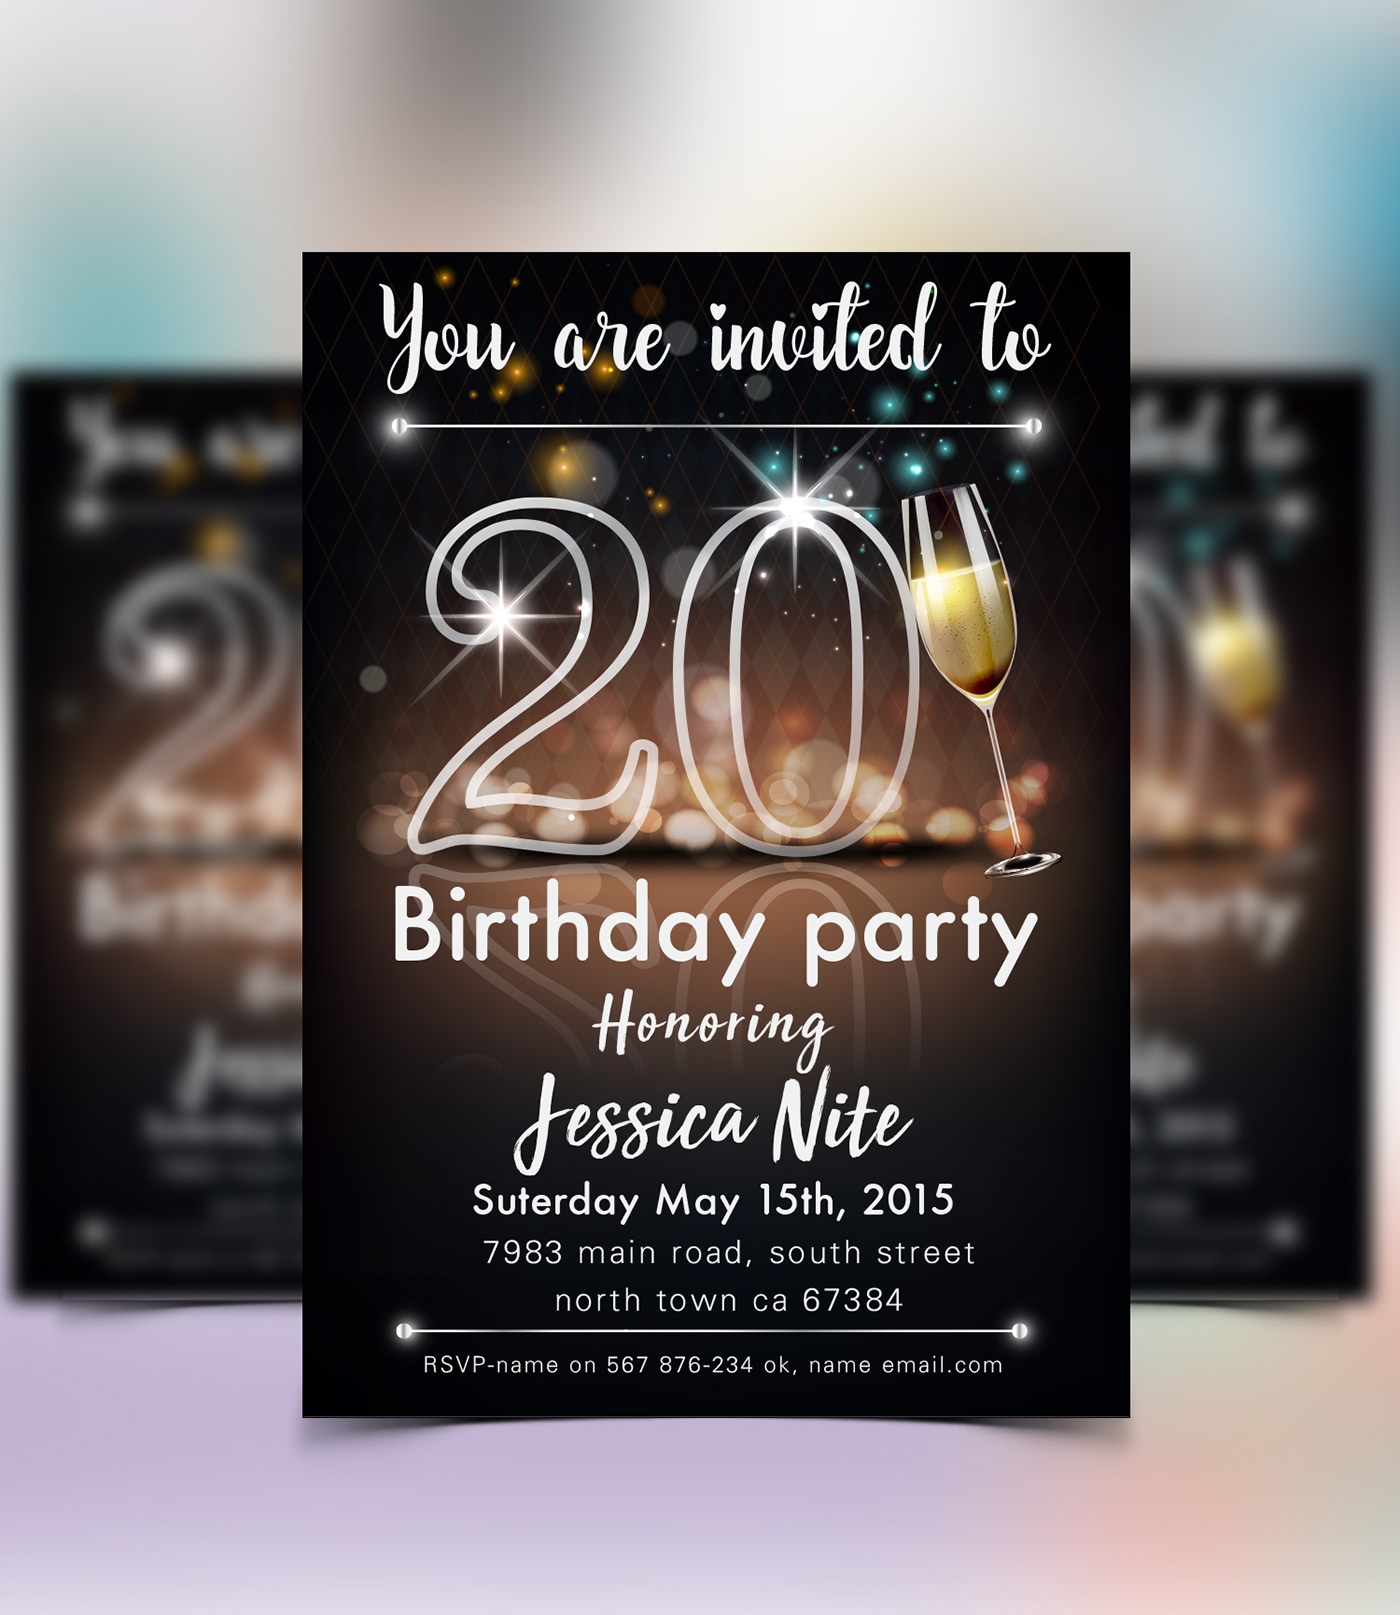 Save The Date Birthday Invitation Template On Behance